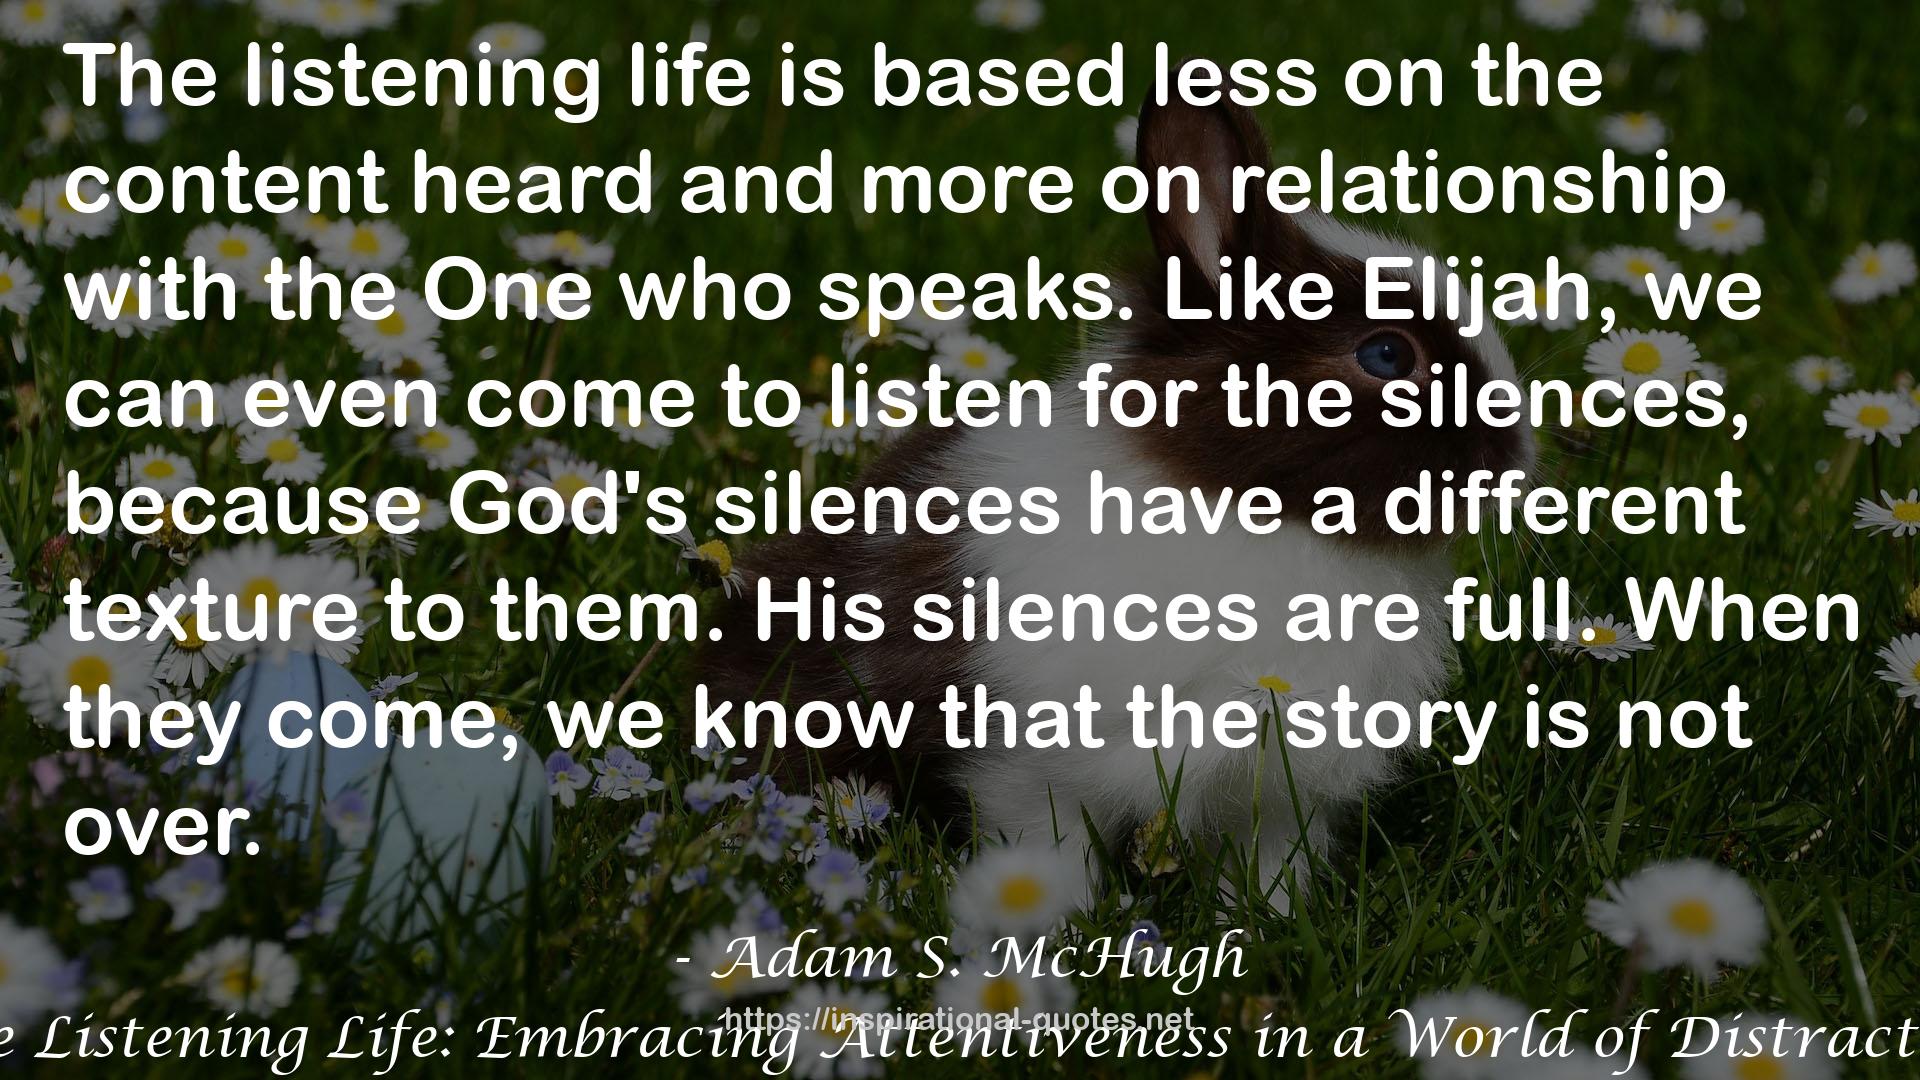 The Listening Life: Embracing Attentiveness in a World of Distraction QUOTES